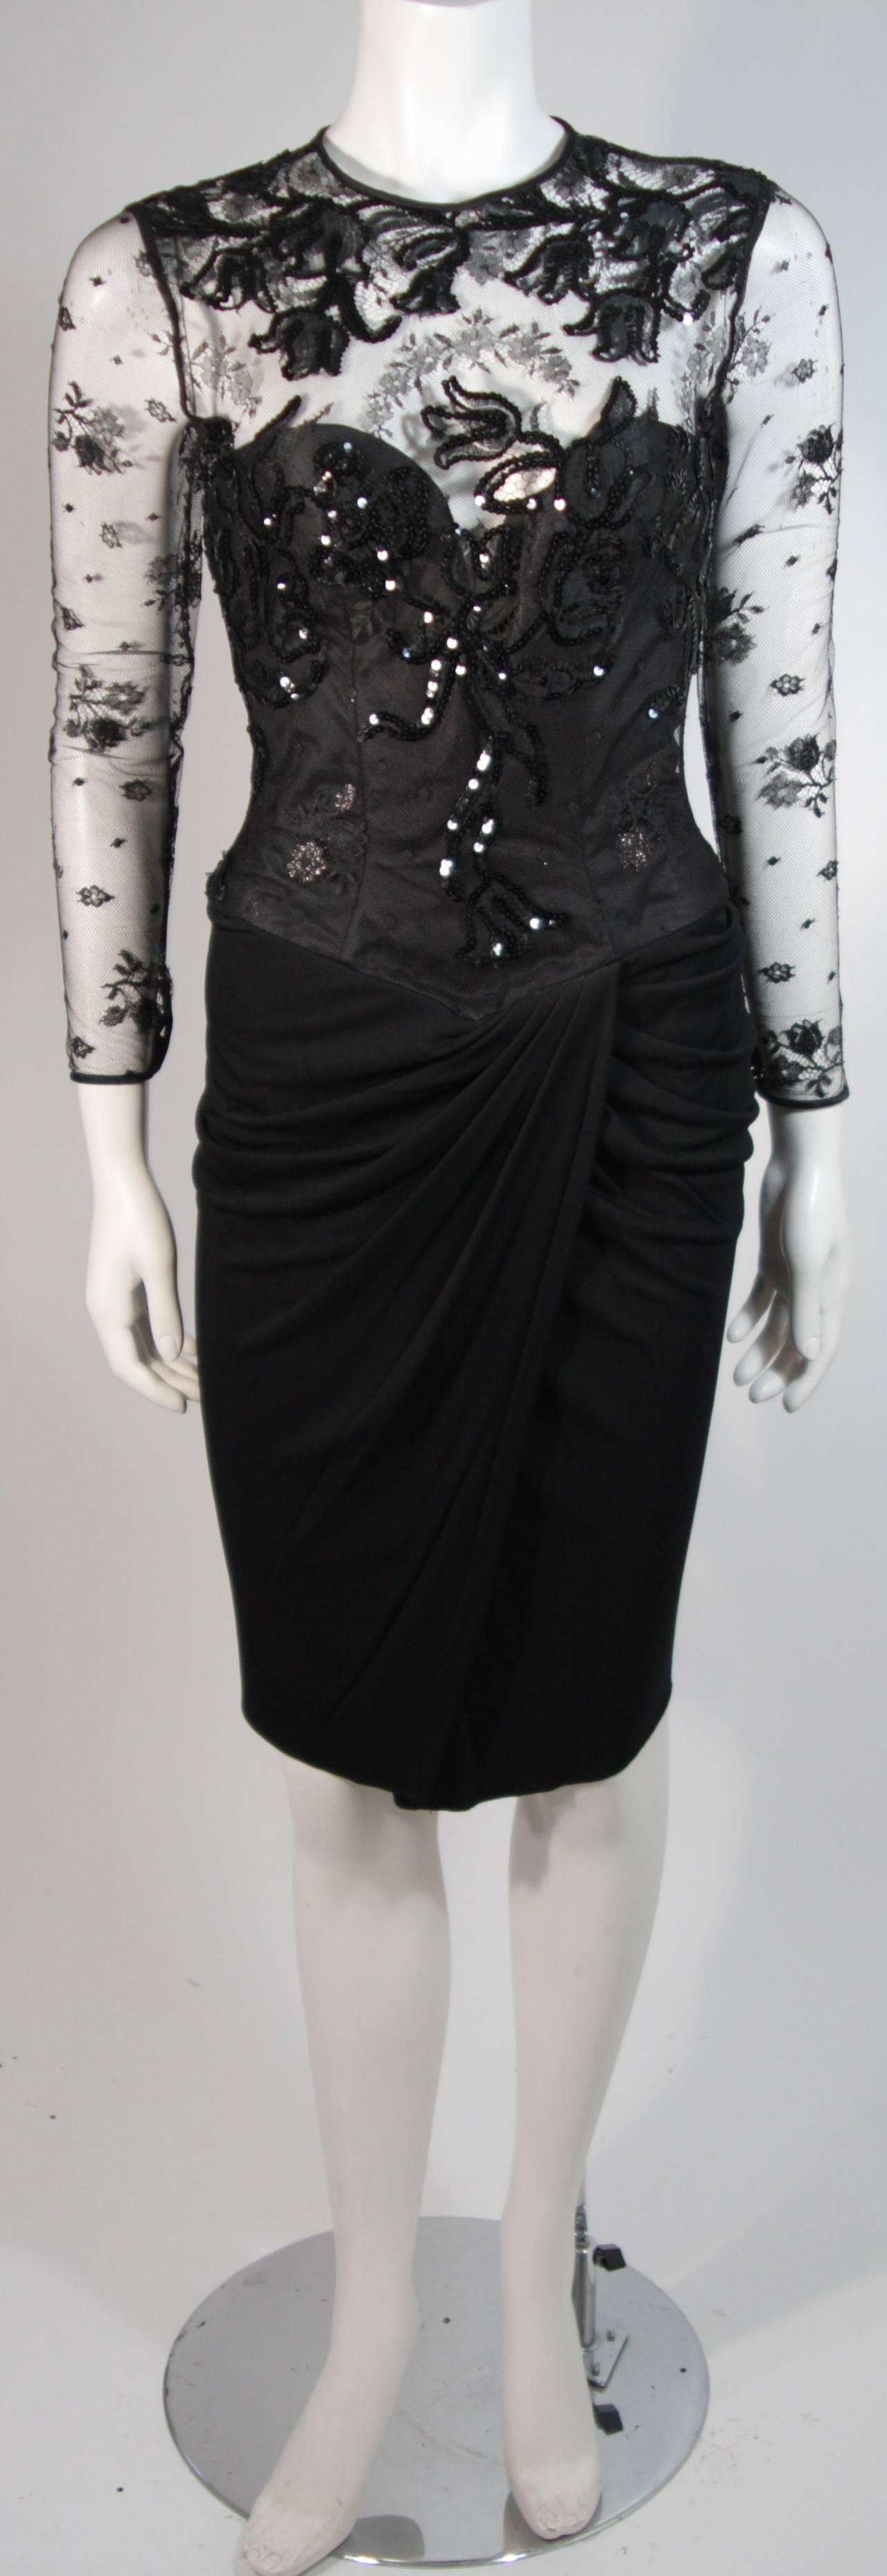 This Vicky Tiel cocktail dress is composed of a black sequin lace and features  a draped jersey skirt. There is a structured interior bustier with boning. There is a center back zipper closure for ease of access. In excellent condition. Made in